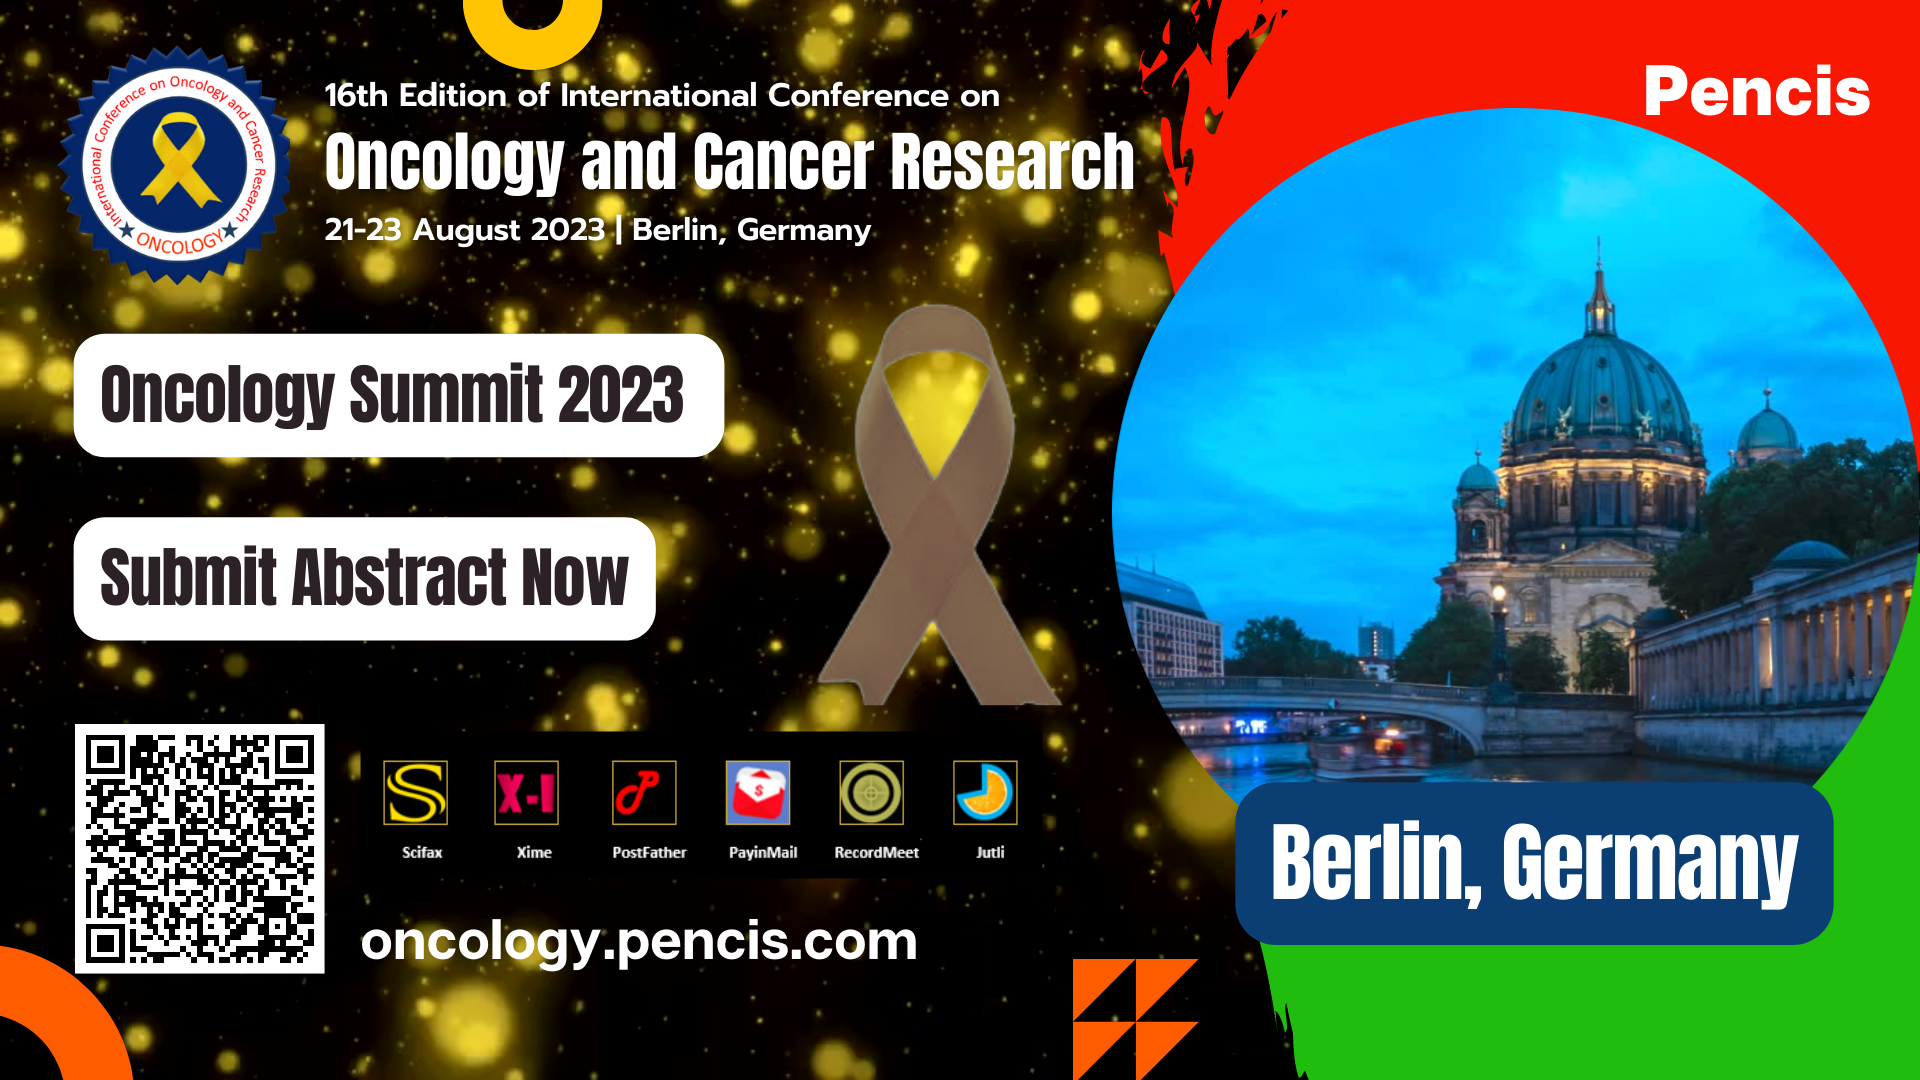 International Conference on Oncology and Cancer Research, Online Event